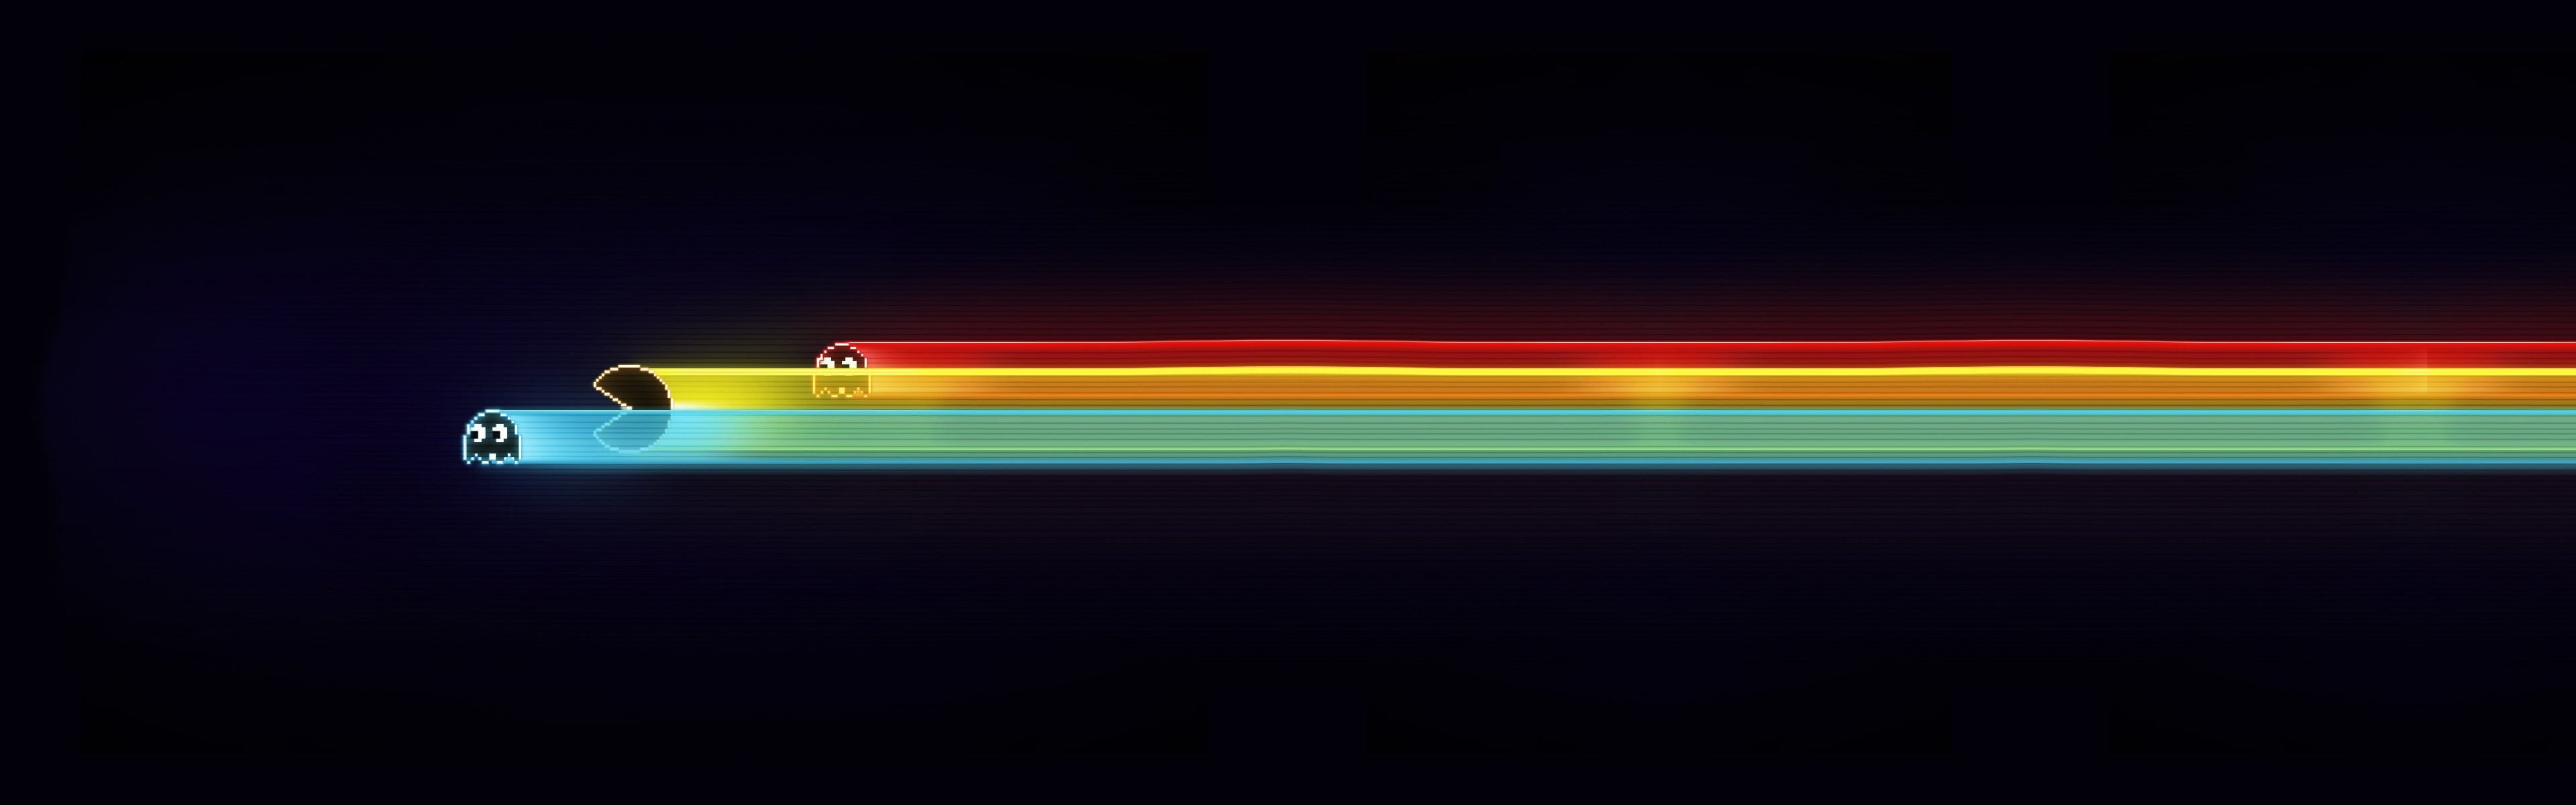 red, yellow, and blue light